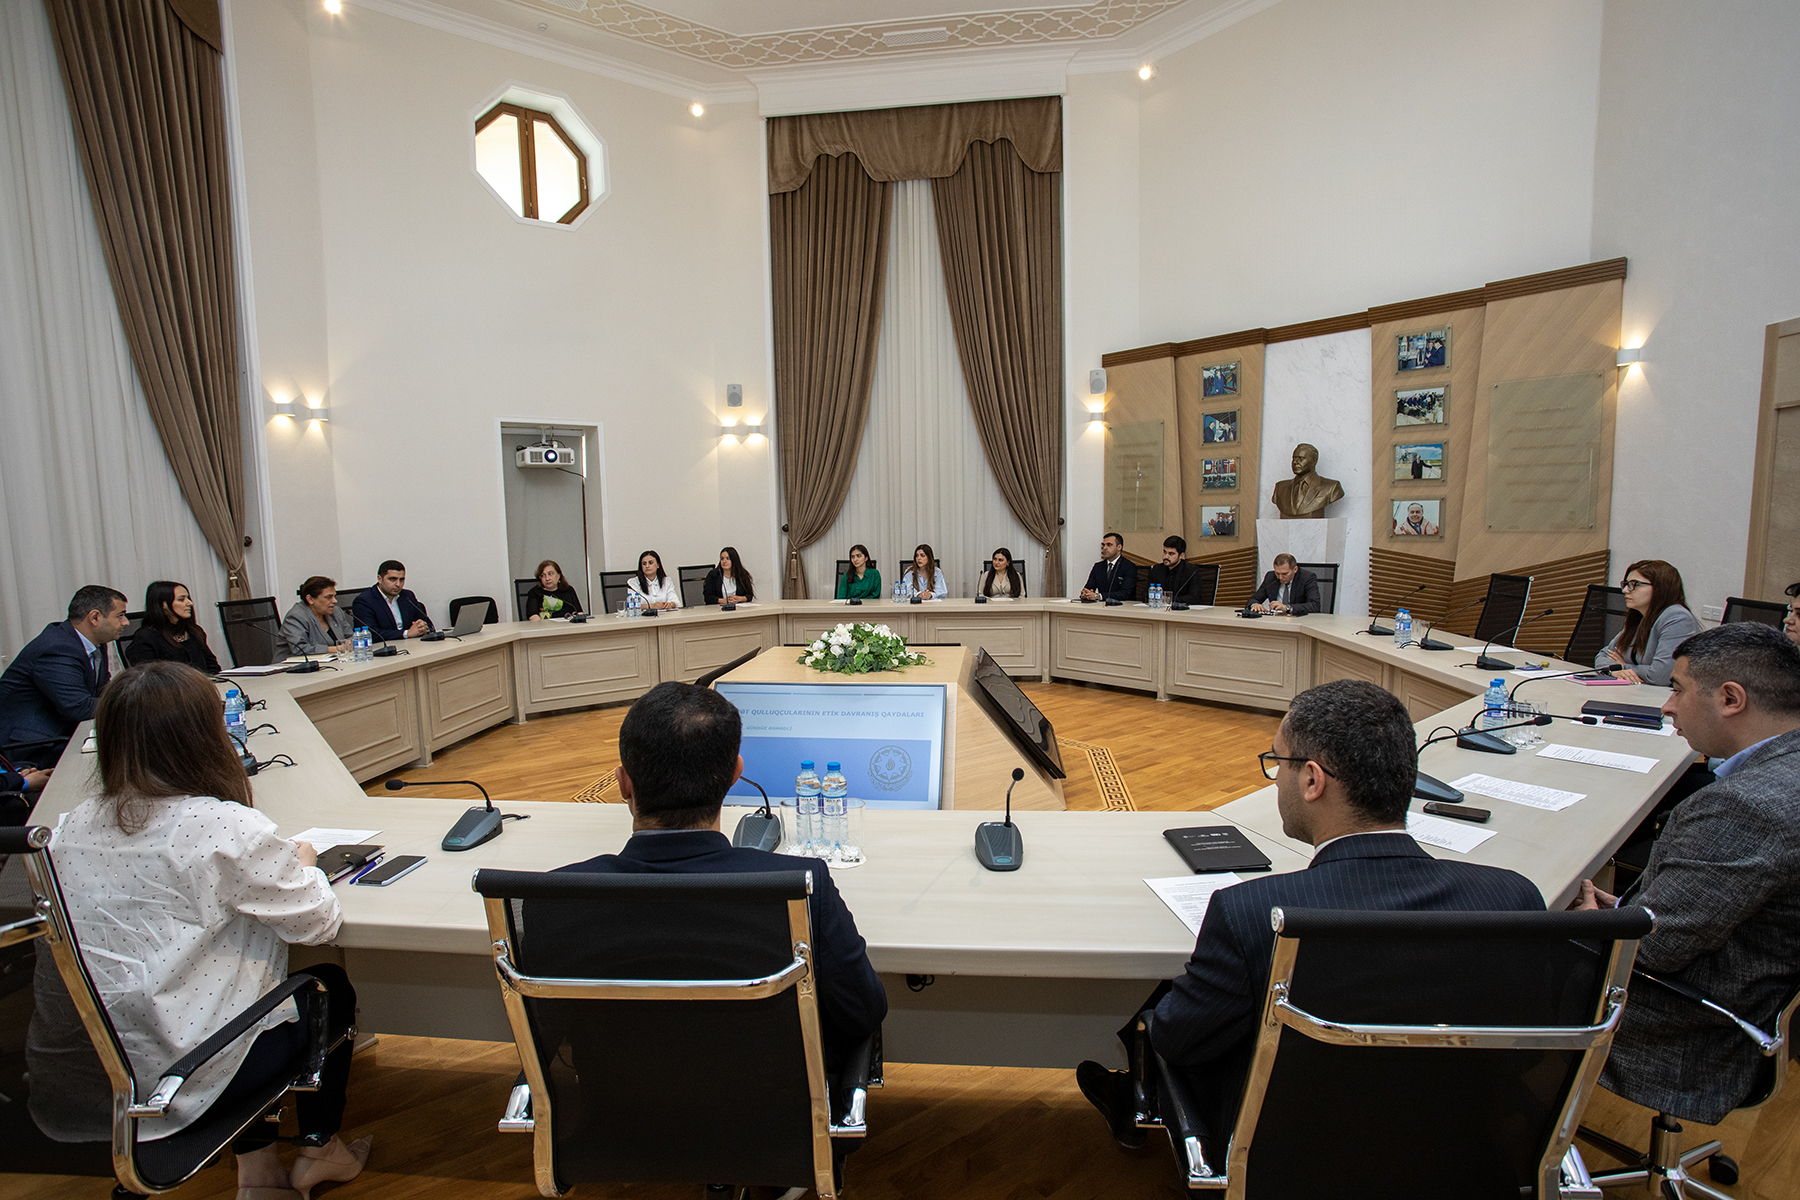 Next training was held in order to improve the professional skills of civil servants